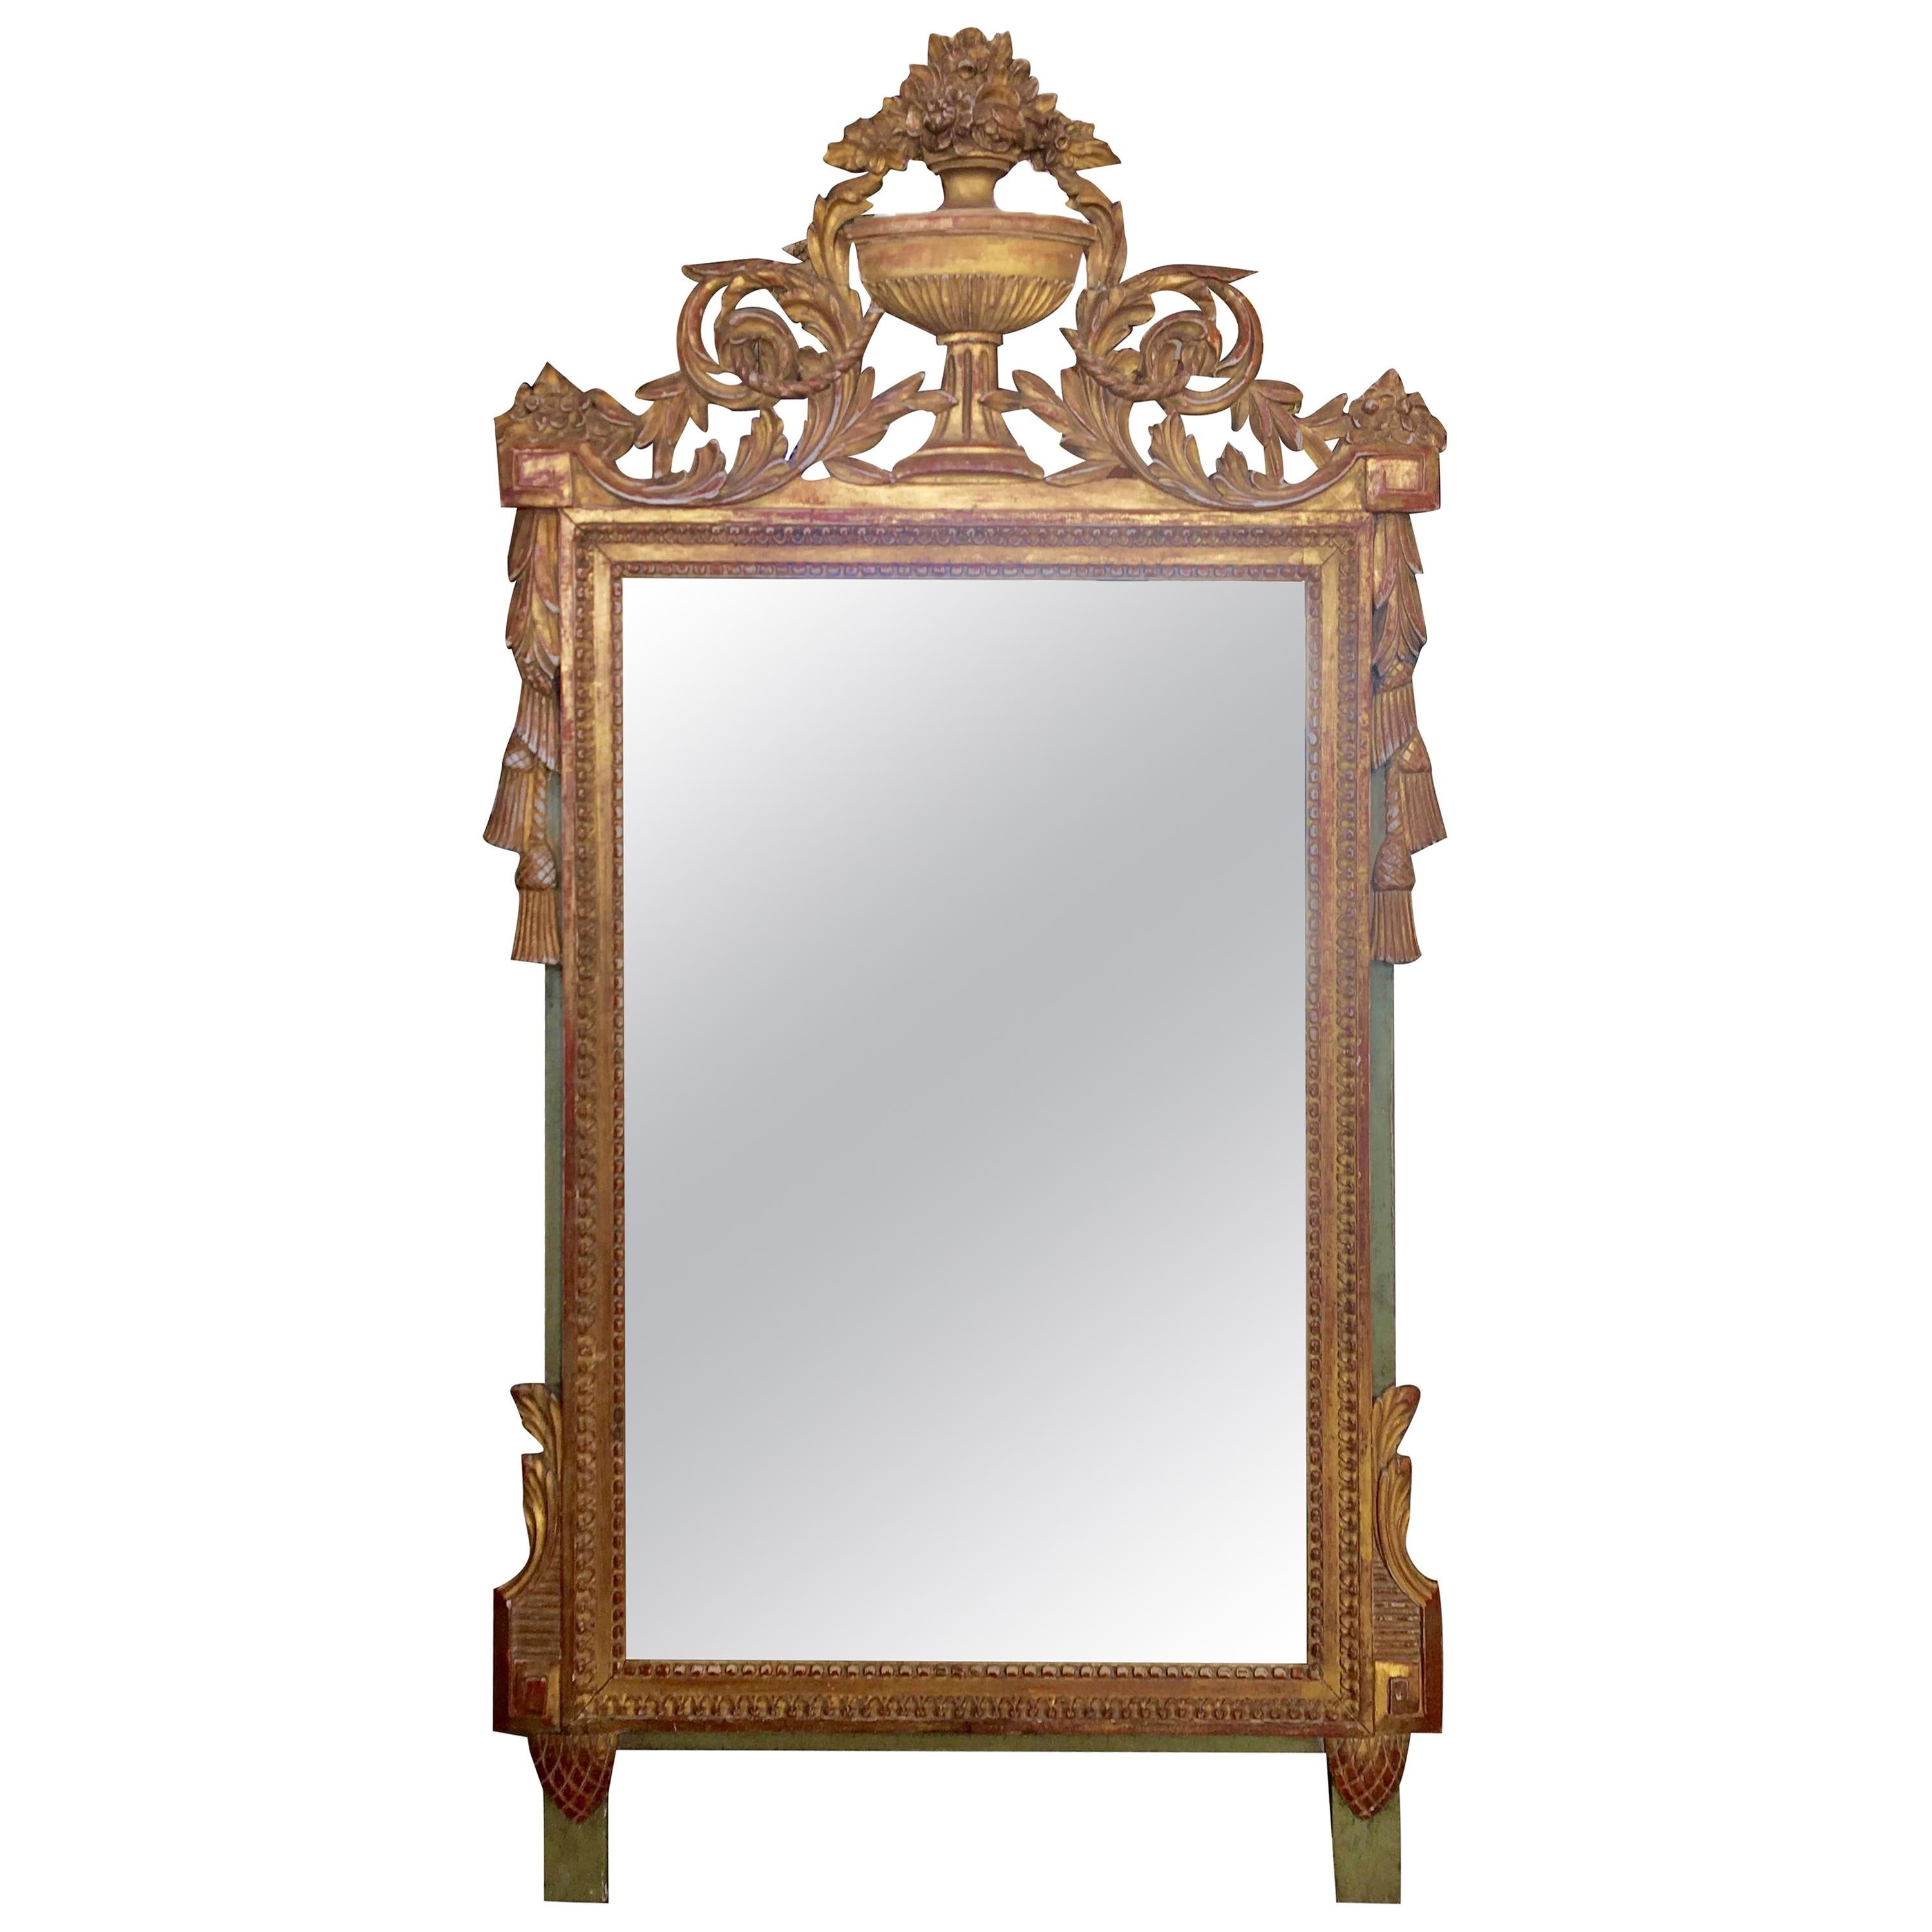 Louis XVI Style Carved and Gilded French Provincial Mirror, 19th Century